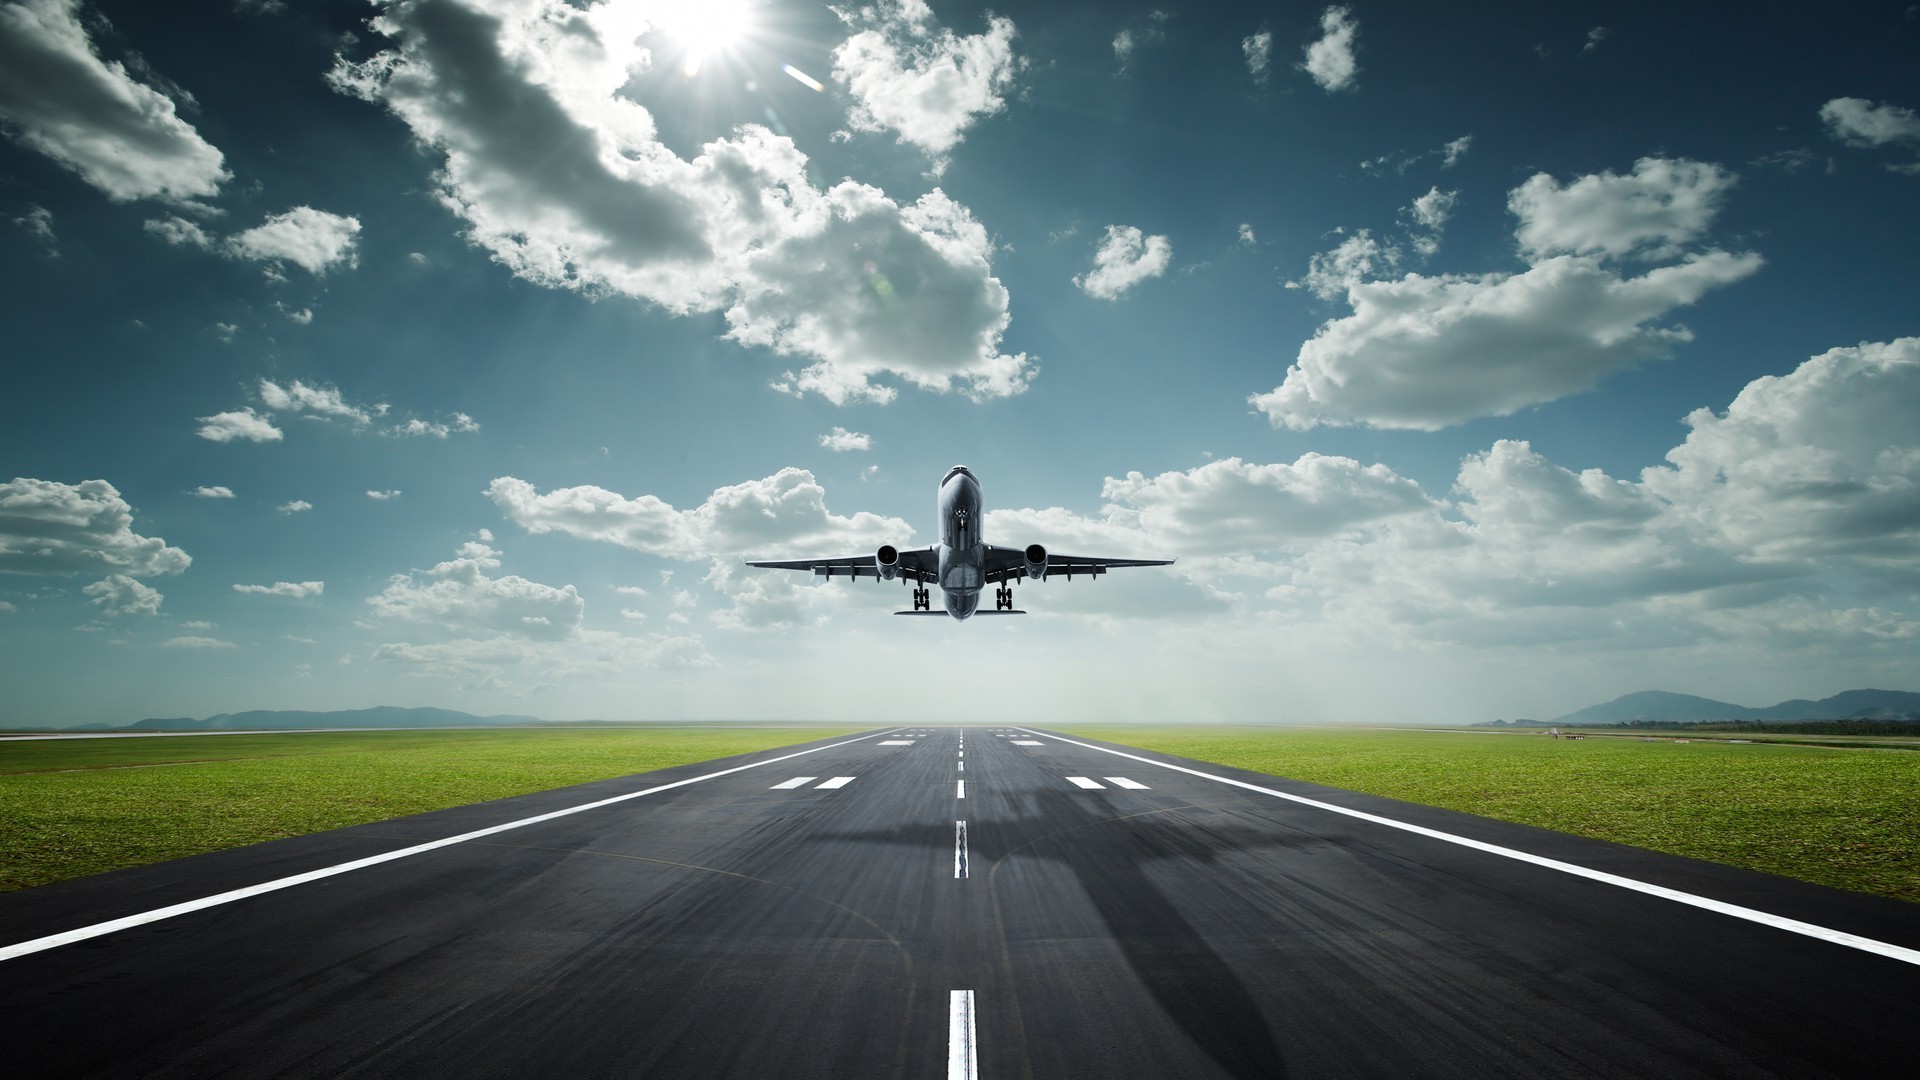 nature, Landscape, Road, Lines, Clouds, Airplane, Runway, Aircraft, Sunlight, Shadow, Field, Grass, Hill, Flying, Wheels Wallpaper